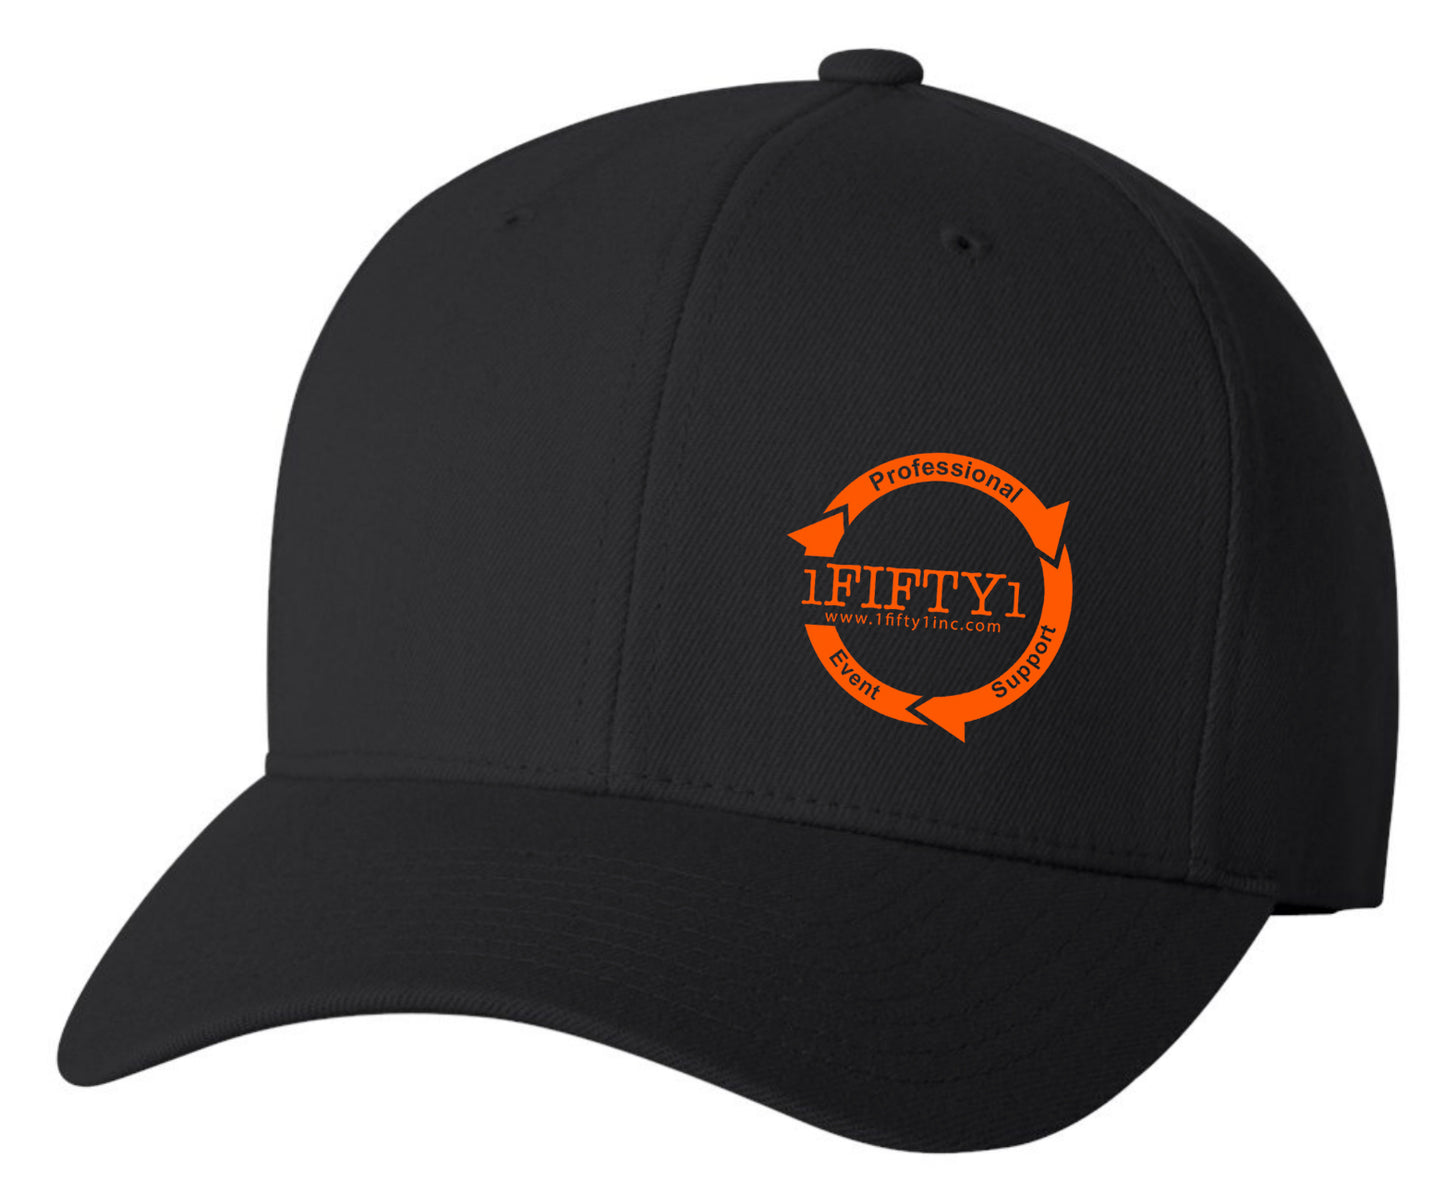 1Fifty1 *Embroidered Logo Flexfit (Black)